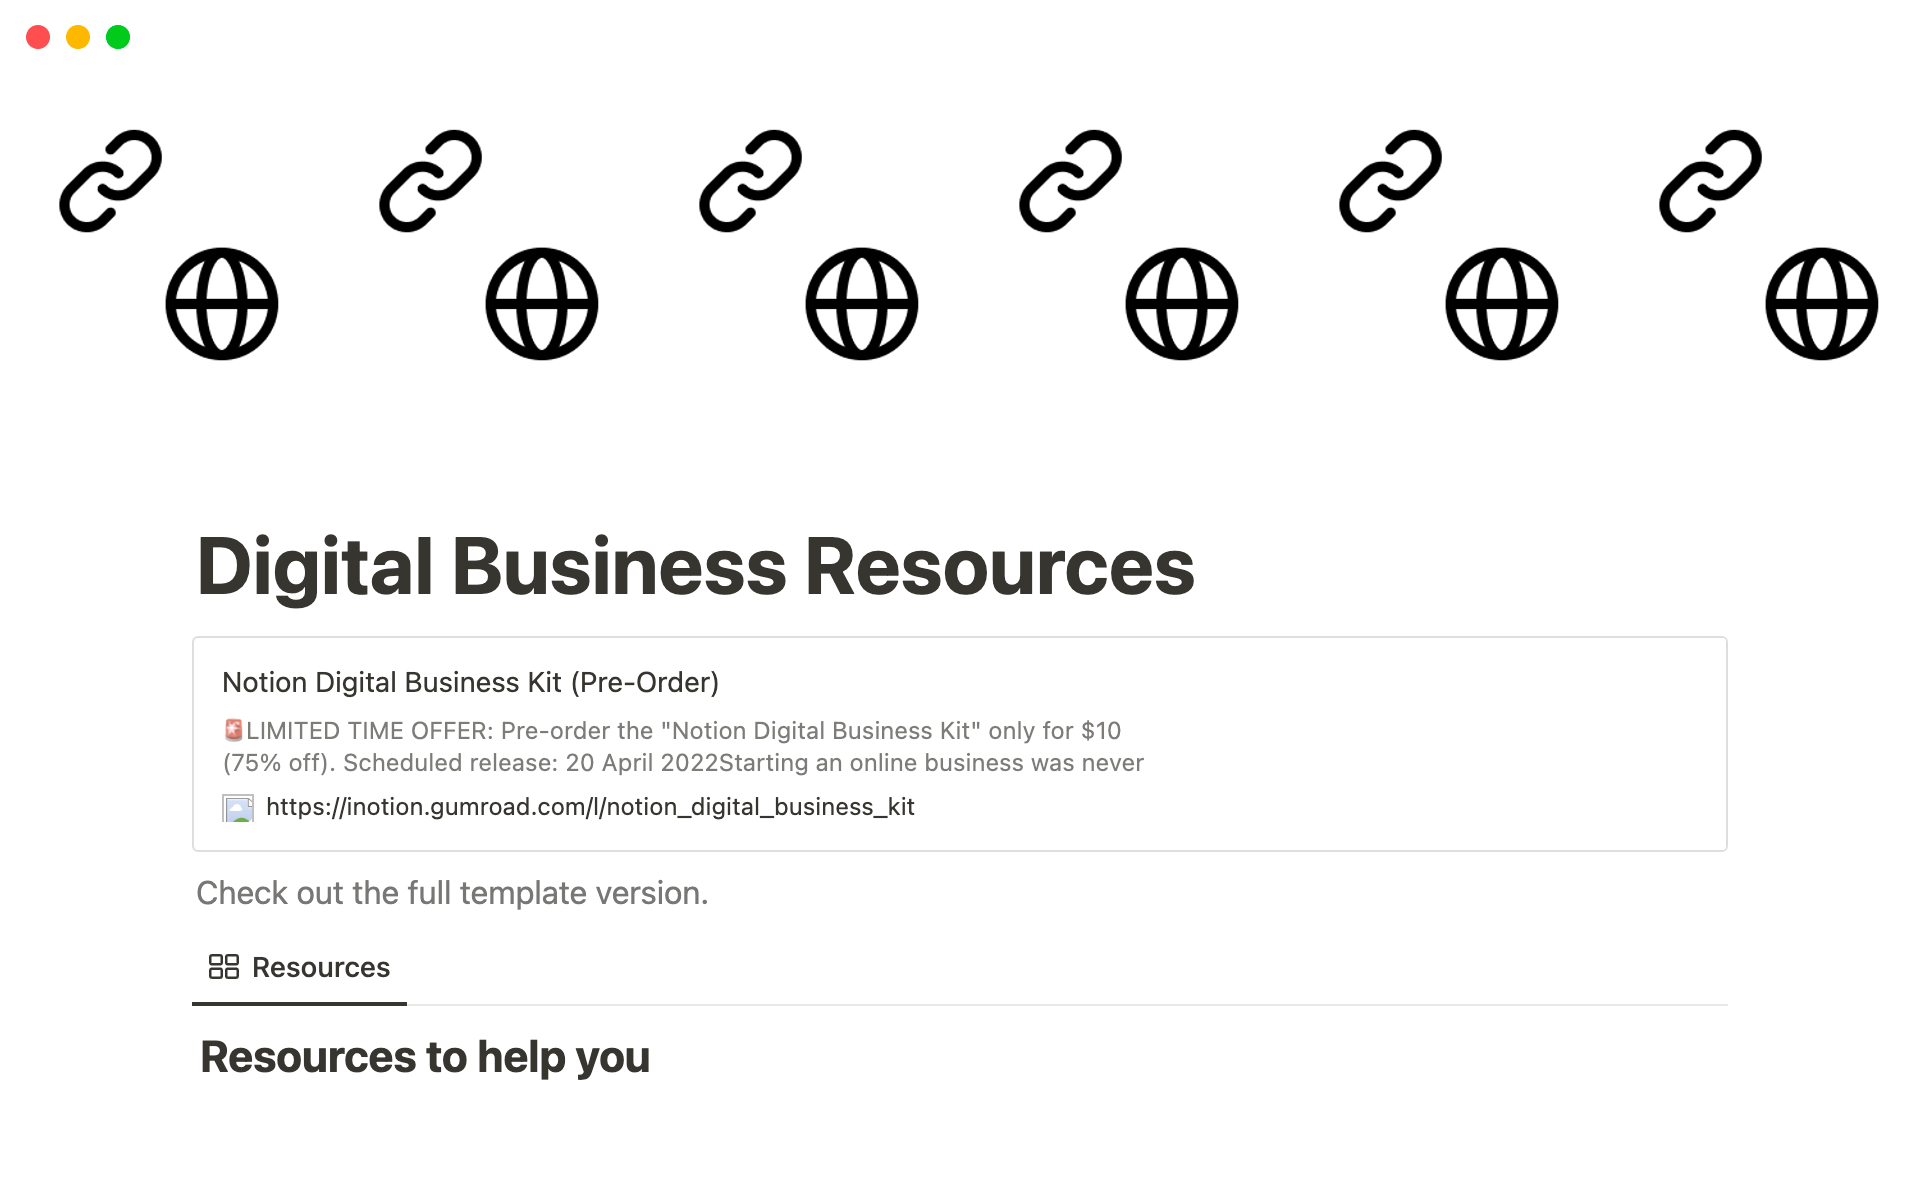 Get the best resources for your digital business right within Notion.